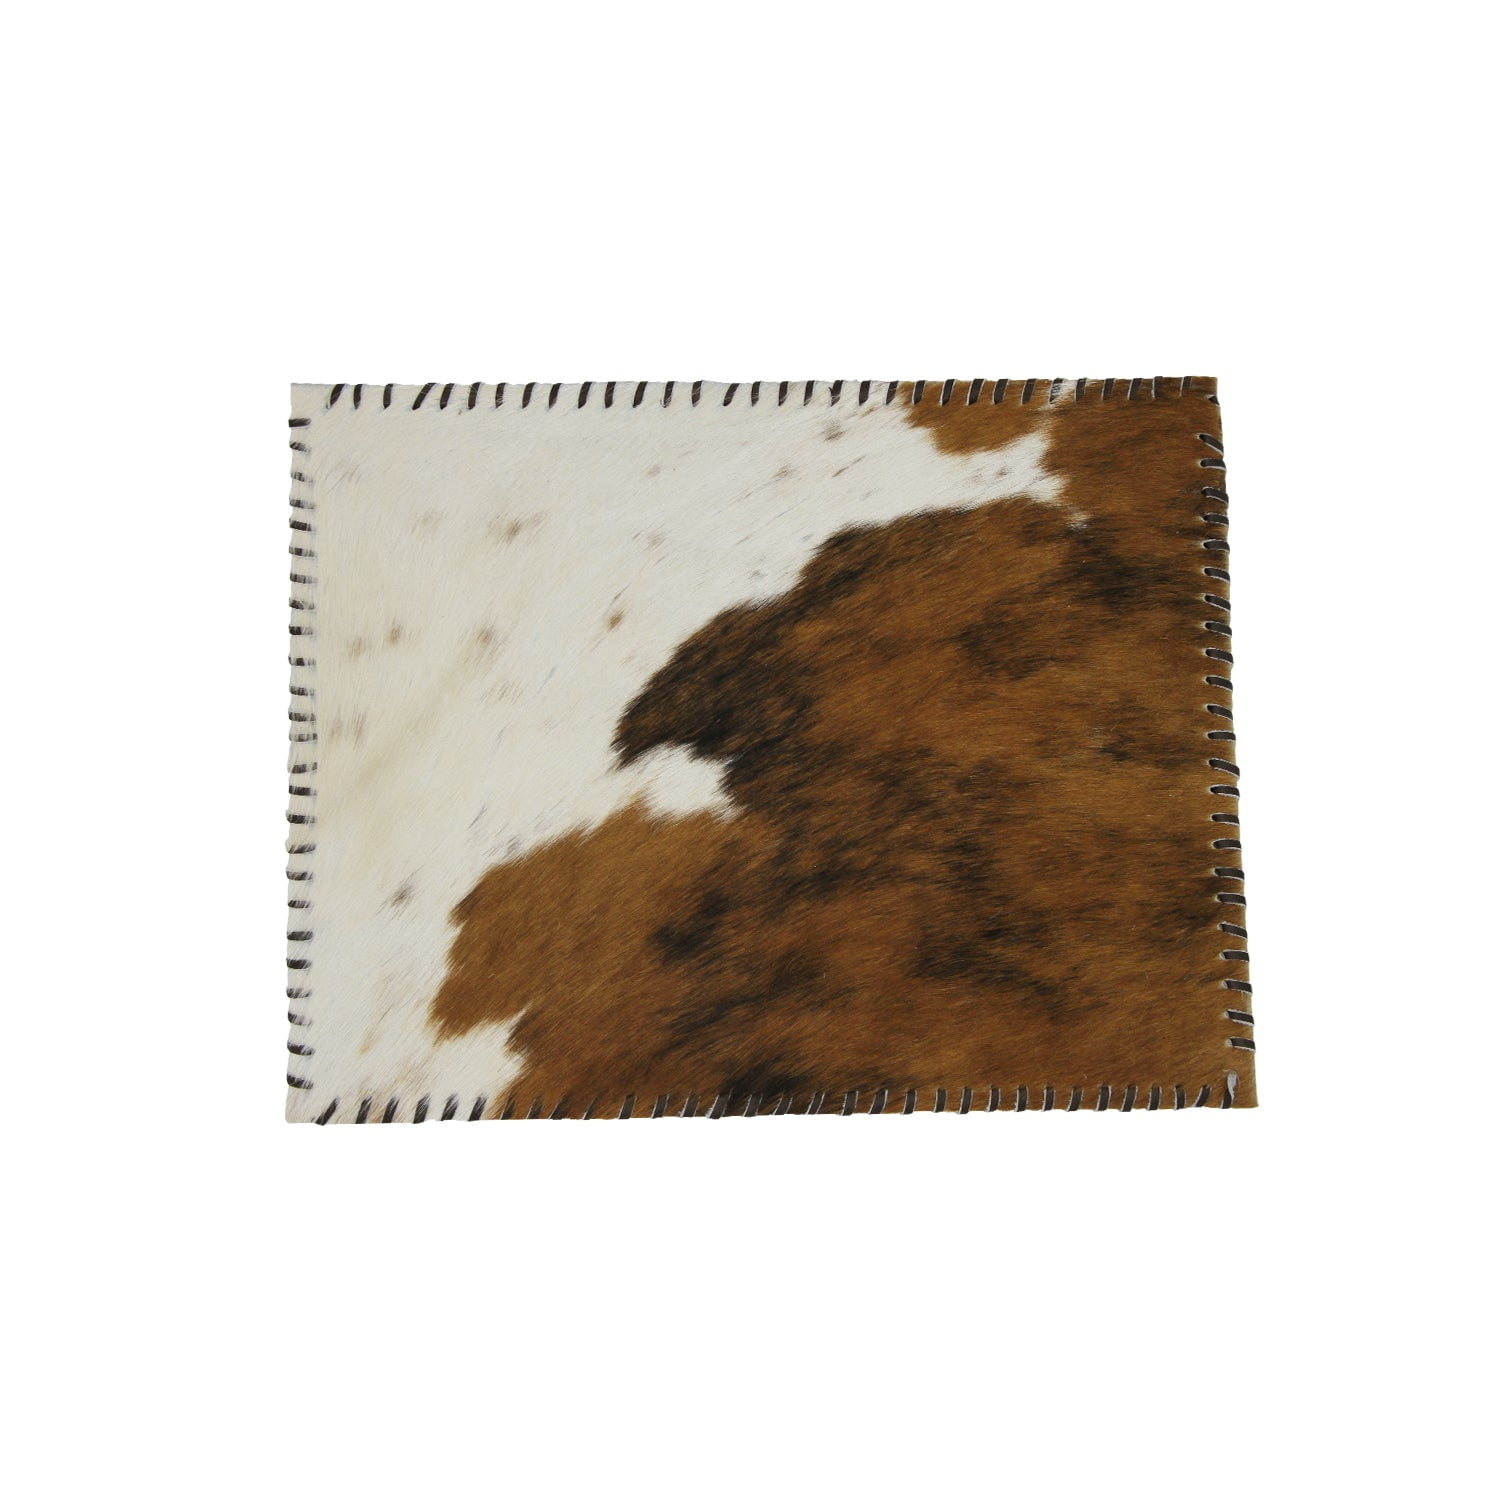  jejeloiu Cow Fur Placemats Set of 4, Cowhide Place Mats 12x18  Inch for Dining Table Decorations, Rustic Western Farmhosue White Brown  Table Mats for Kitchen Decor Dinner Indoor : Home 